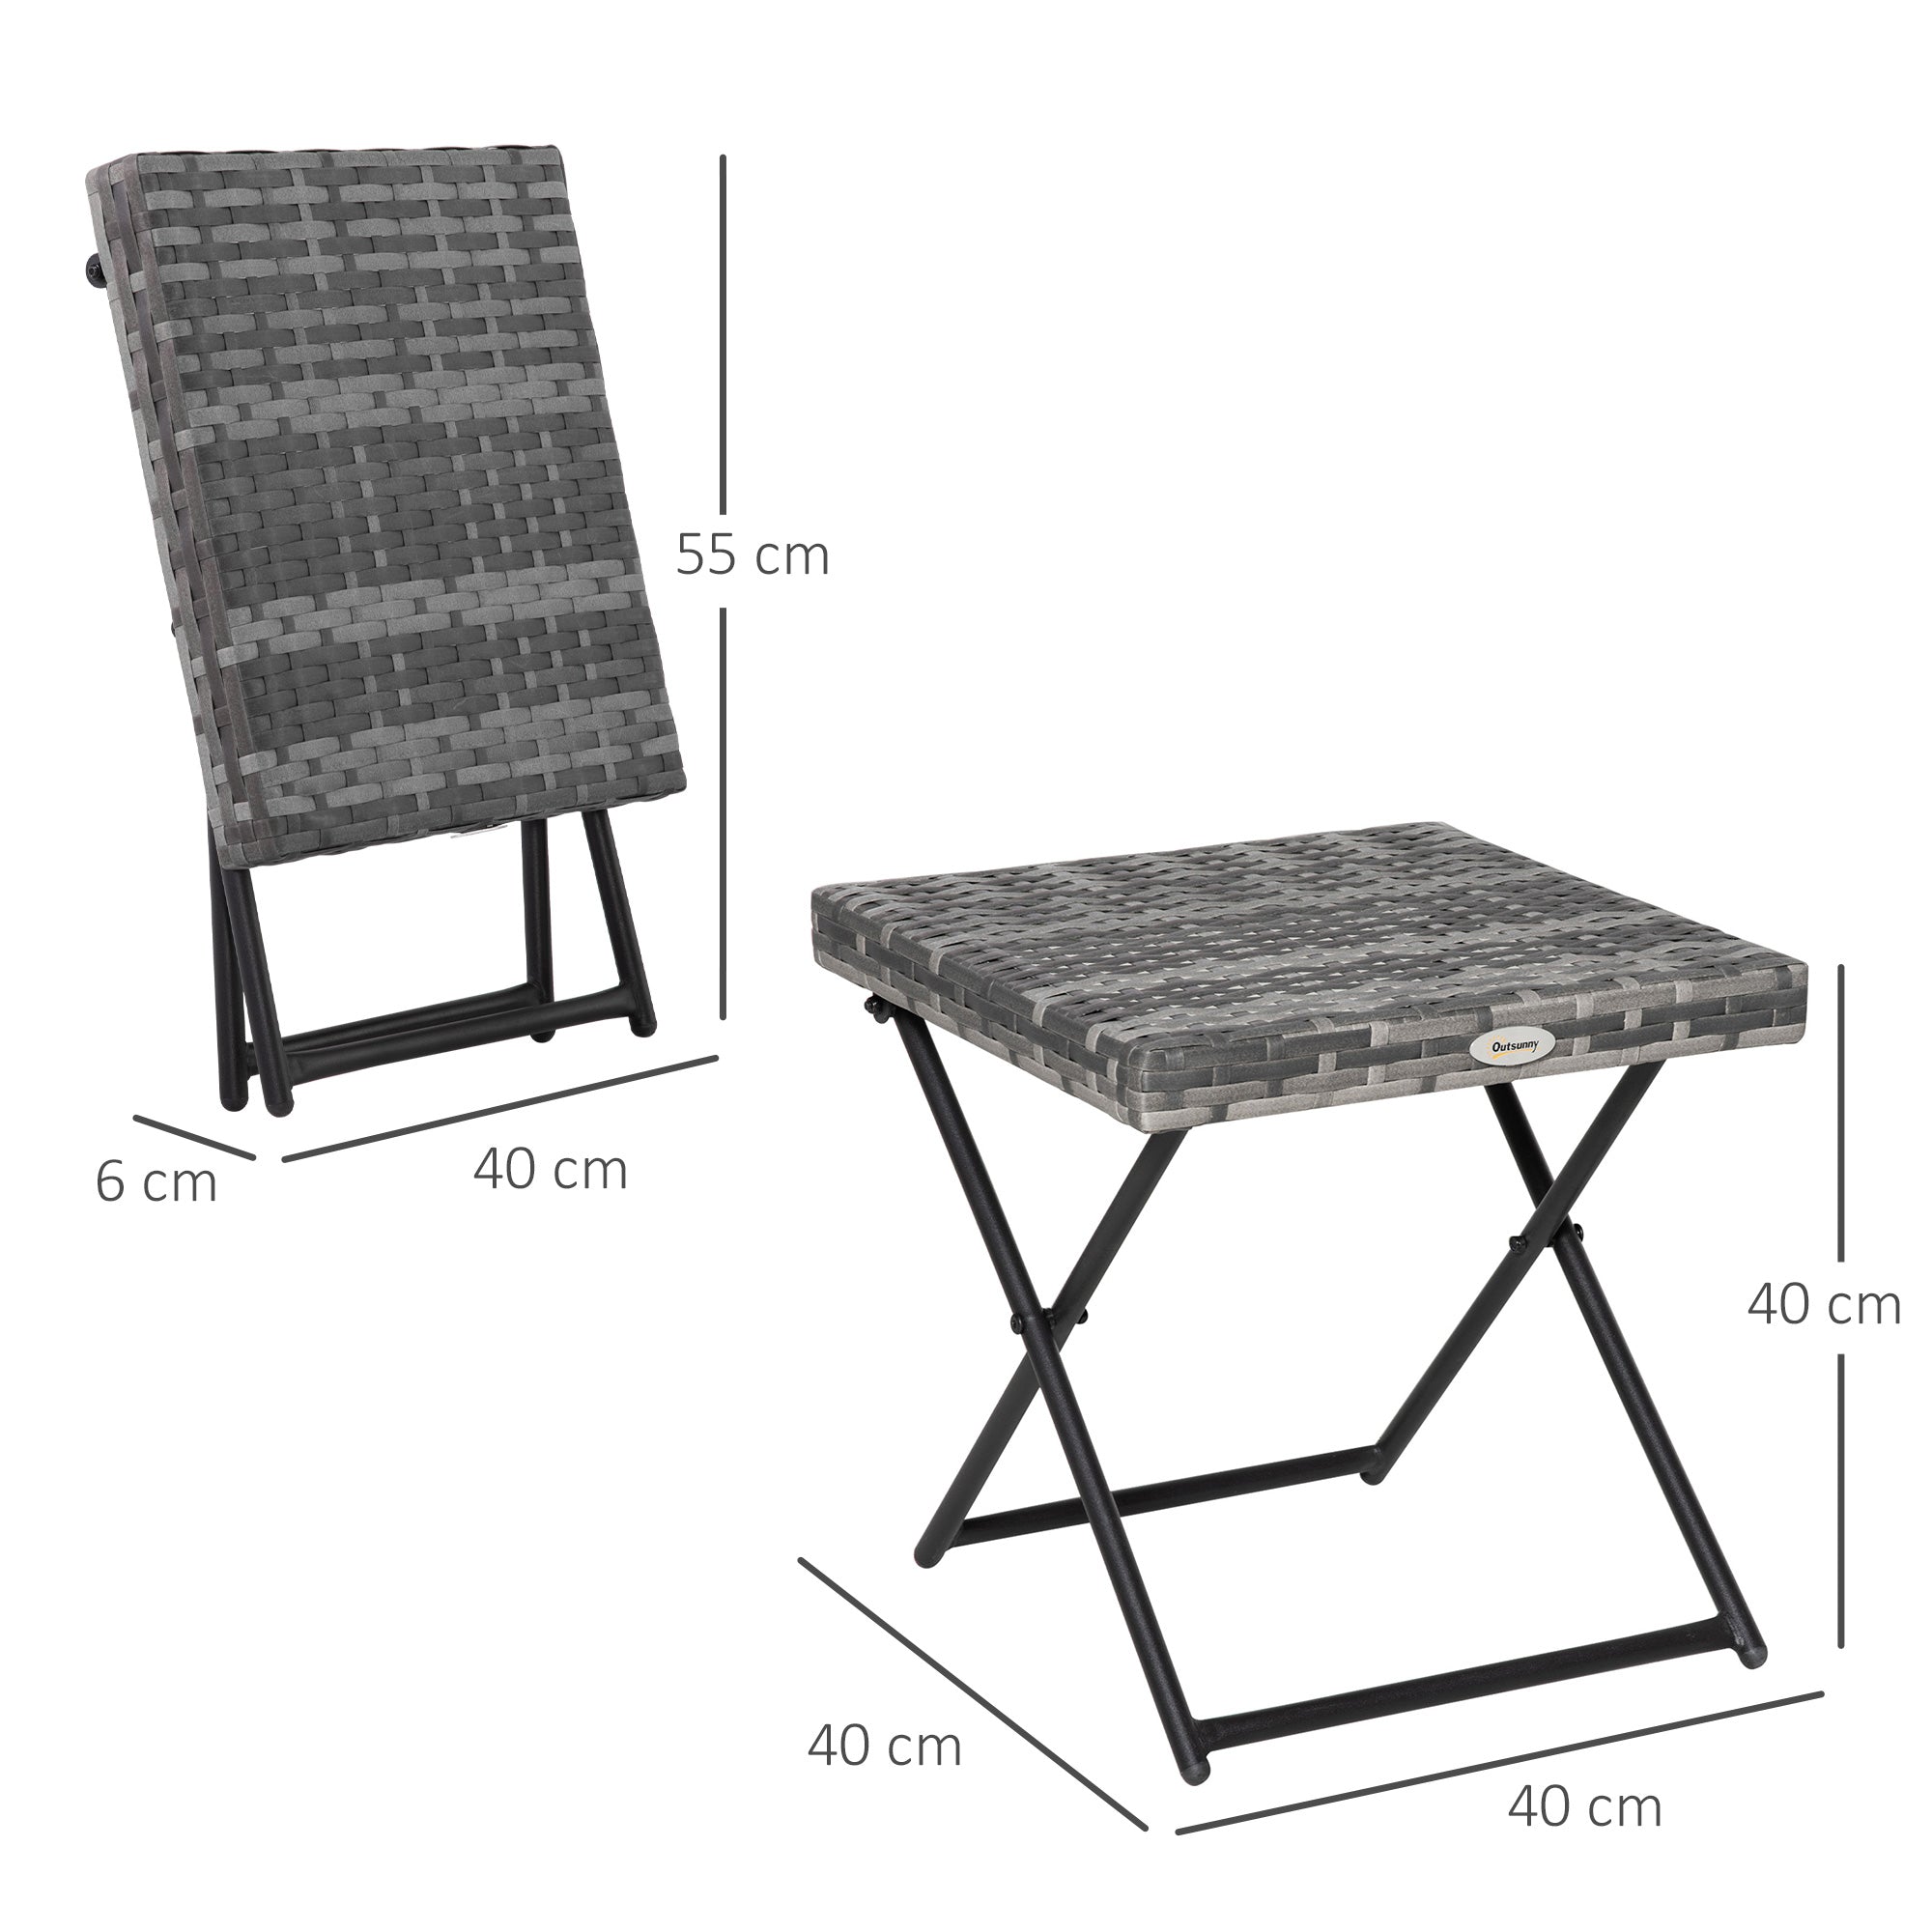 Outsunny Garden Small Folding Square Rattan Coffee Table Bistro Balcony Outdoor Wicker Weave Side Table 40H x 40L x 40Wcm Grey